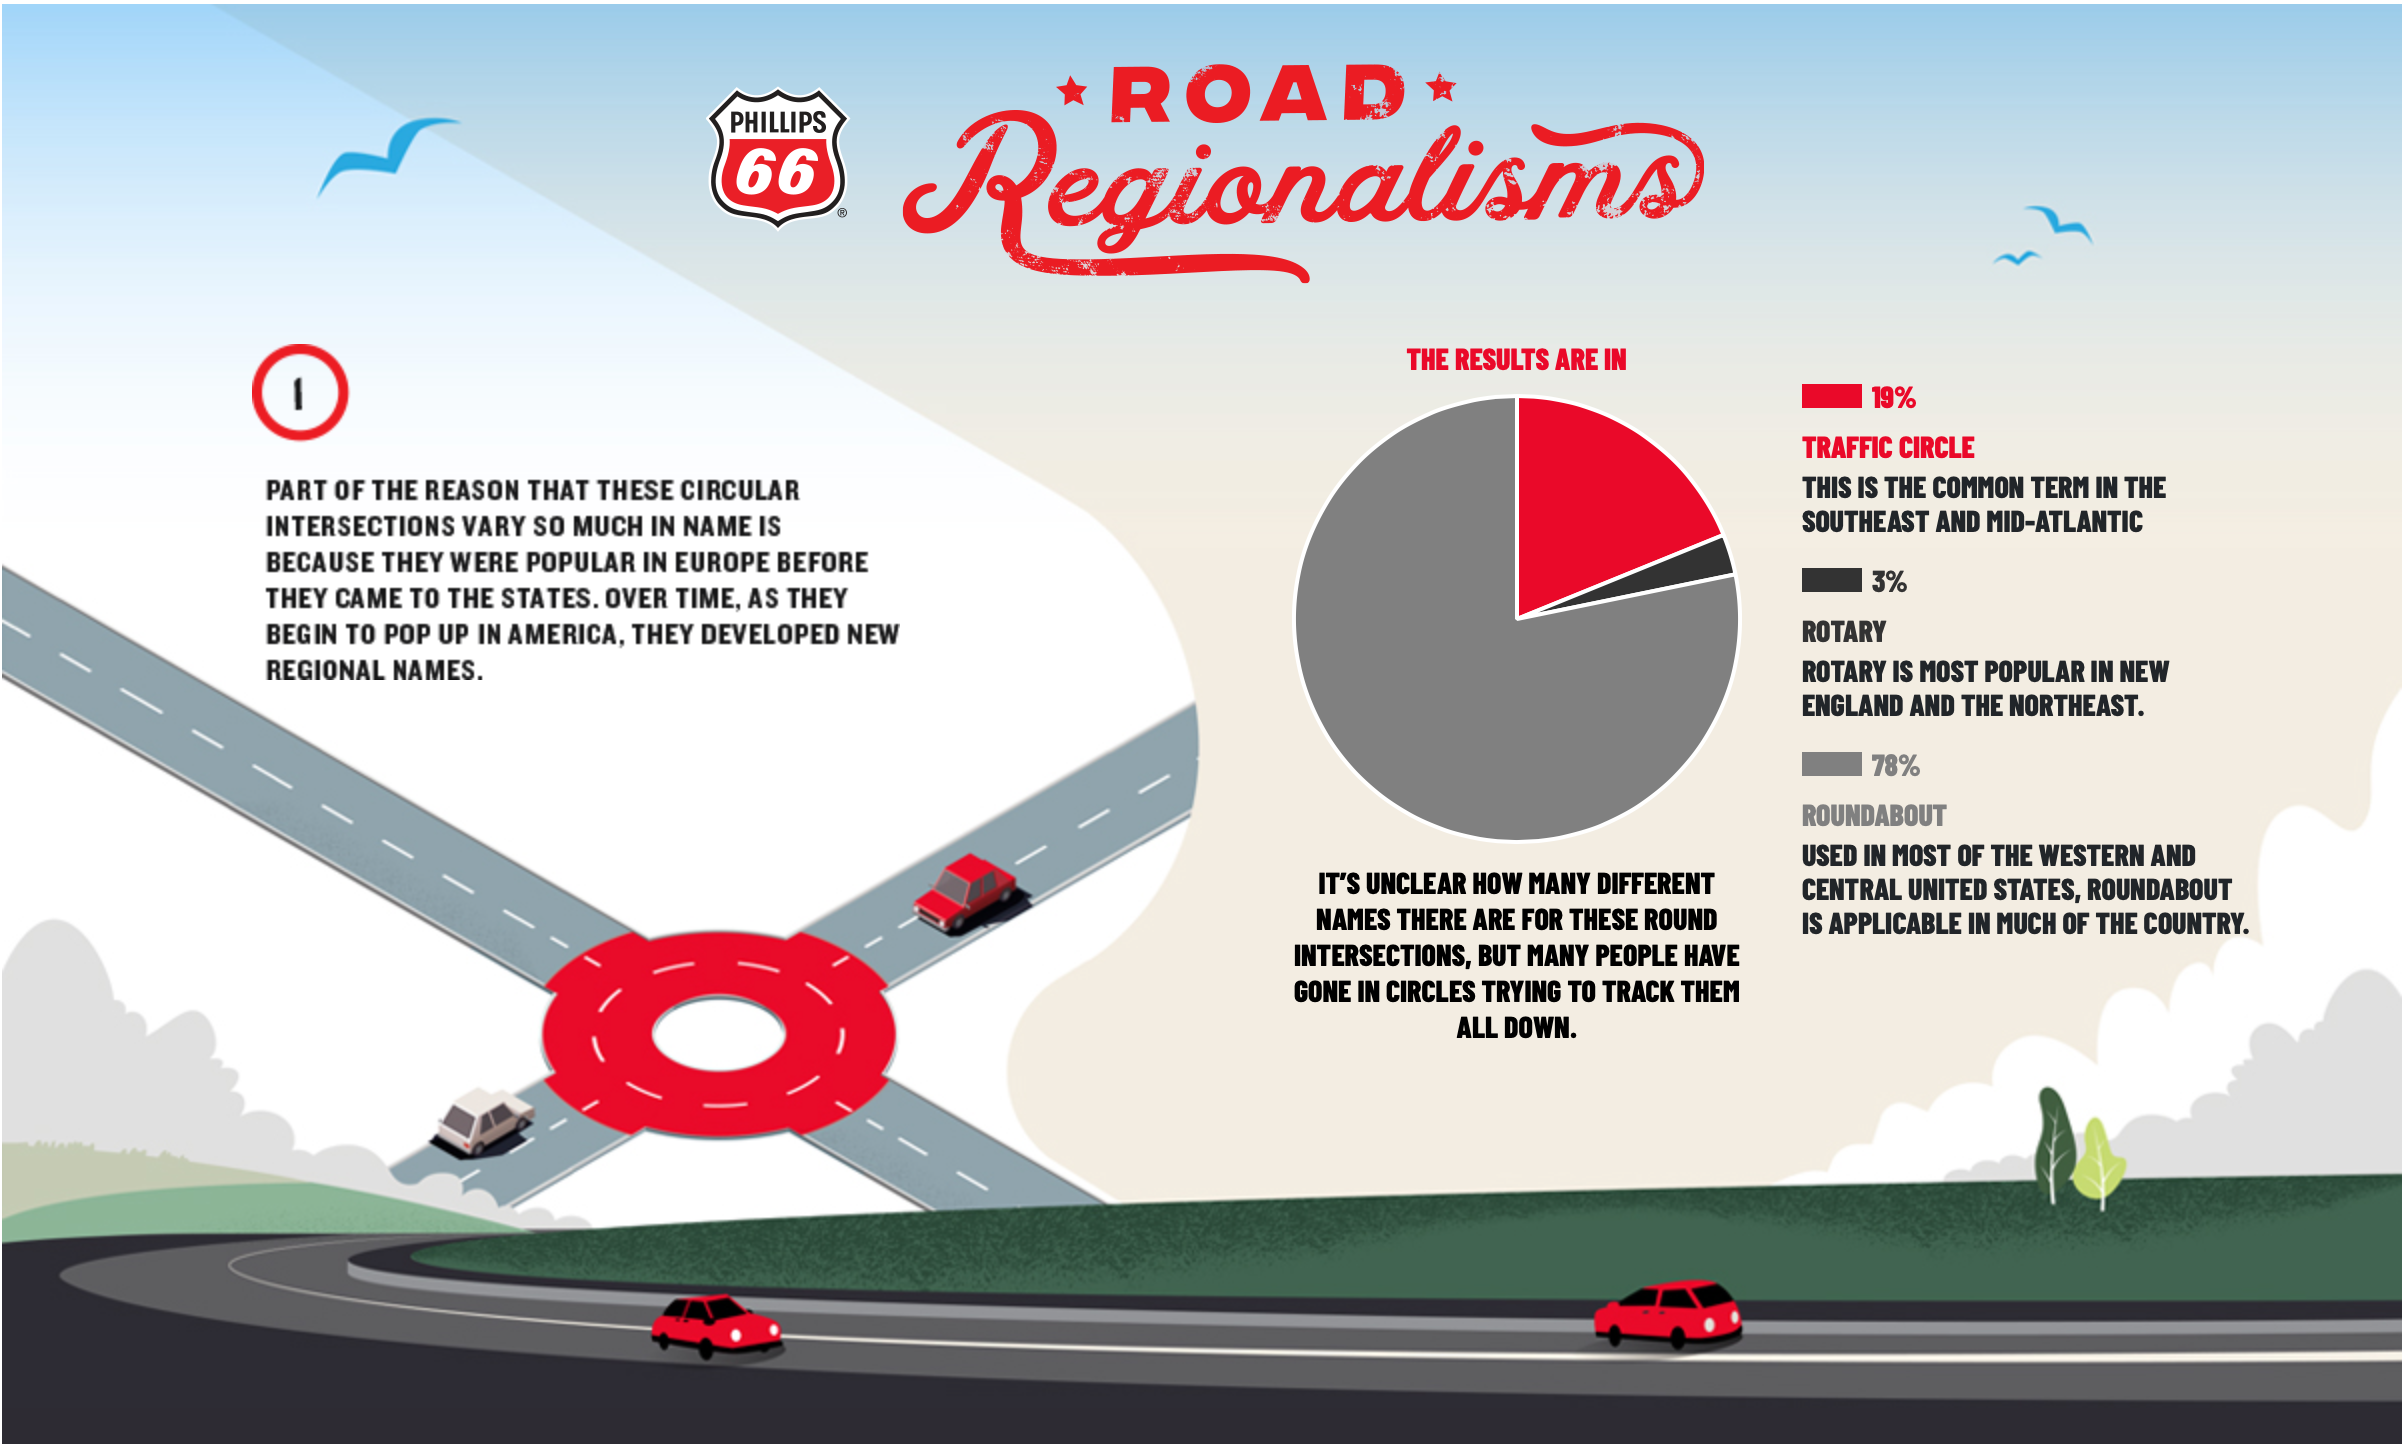 ‘Road Regionalisms’ email quizzes consumers on their everyday driving lingo